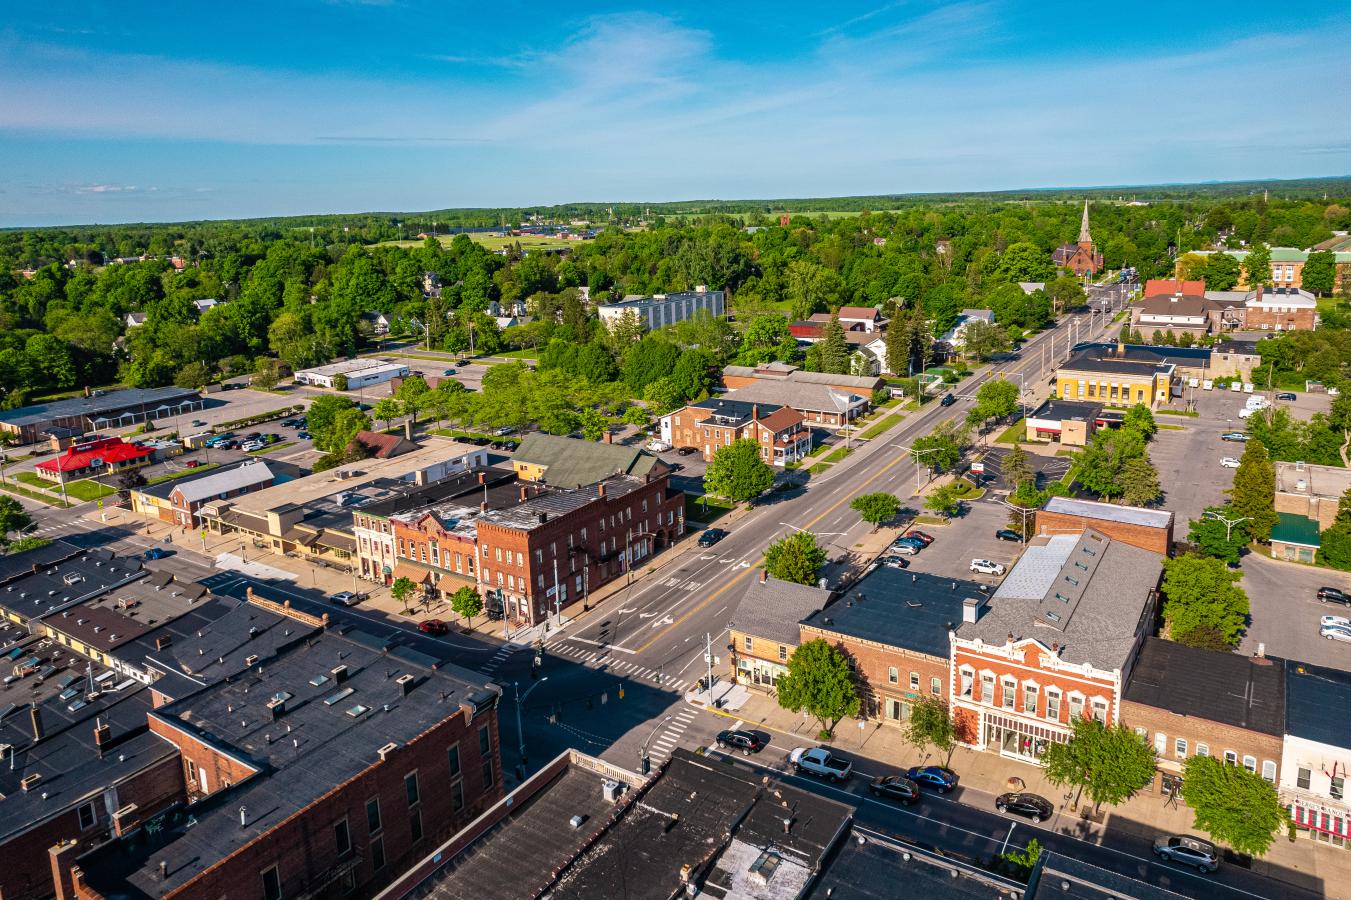 Aerial image of downtown Potsdam, NY